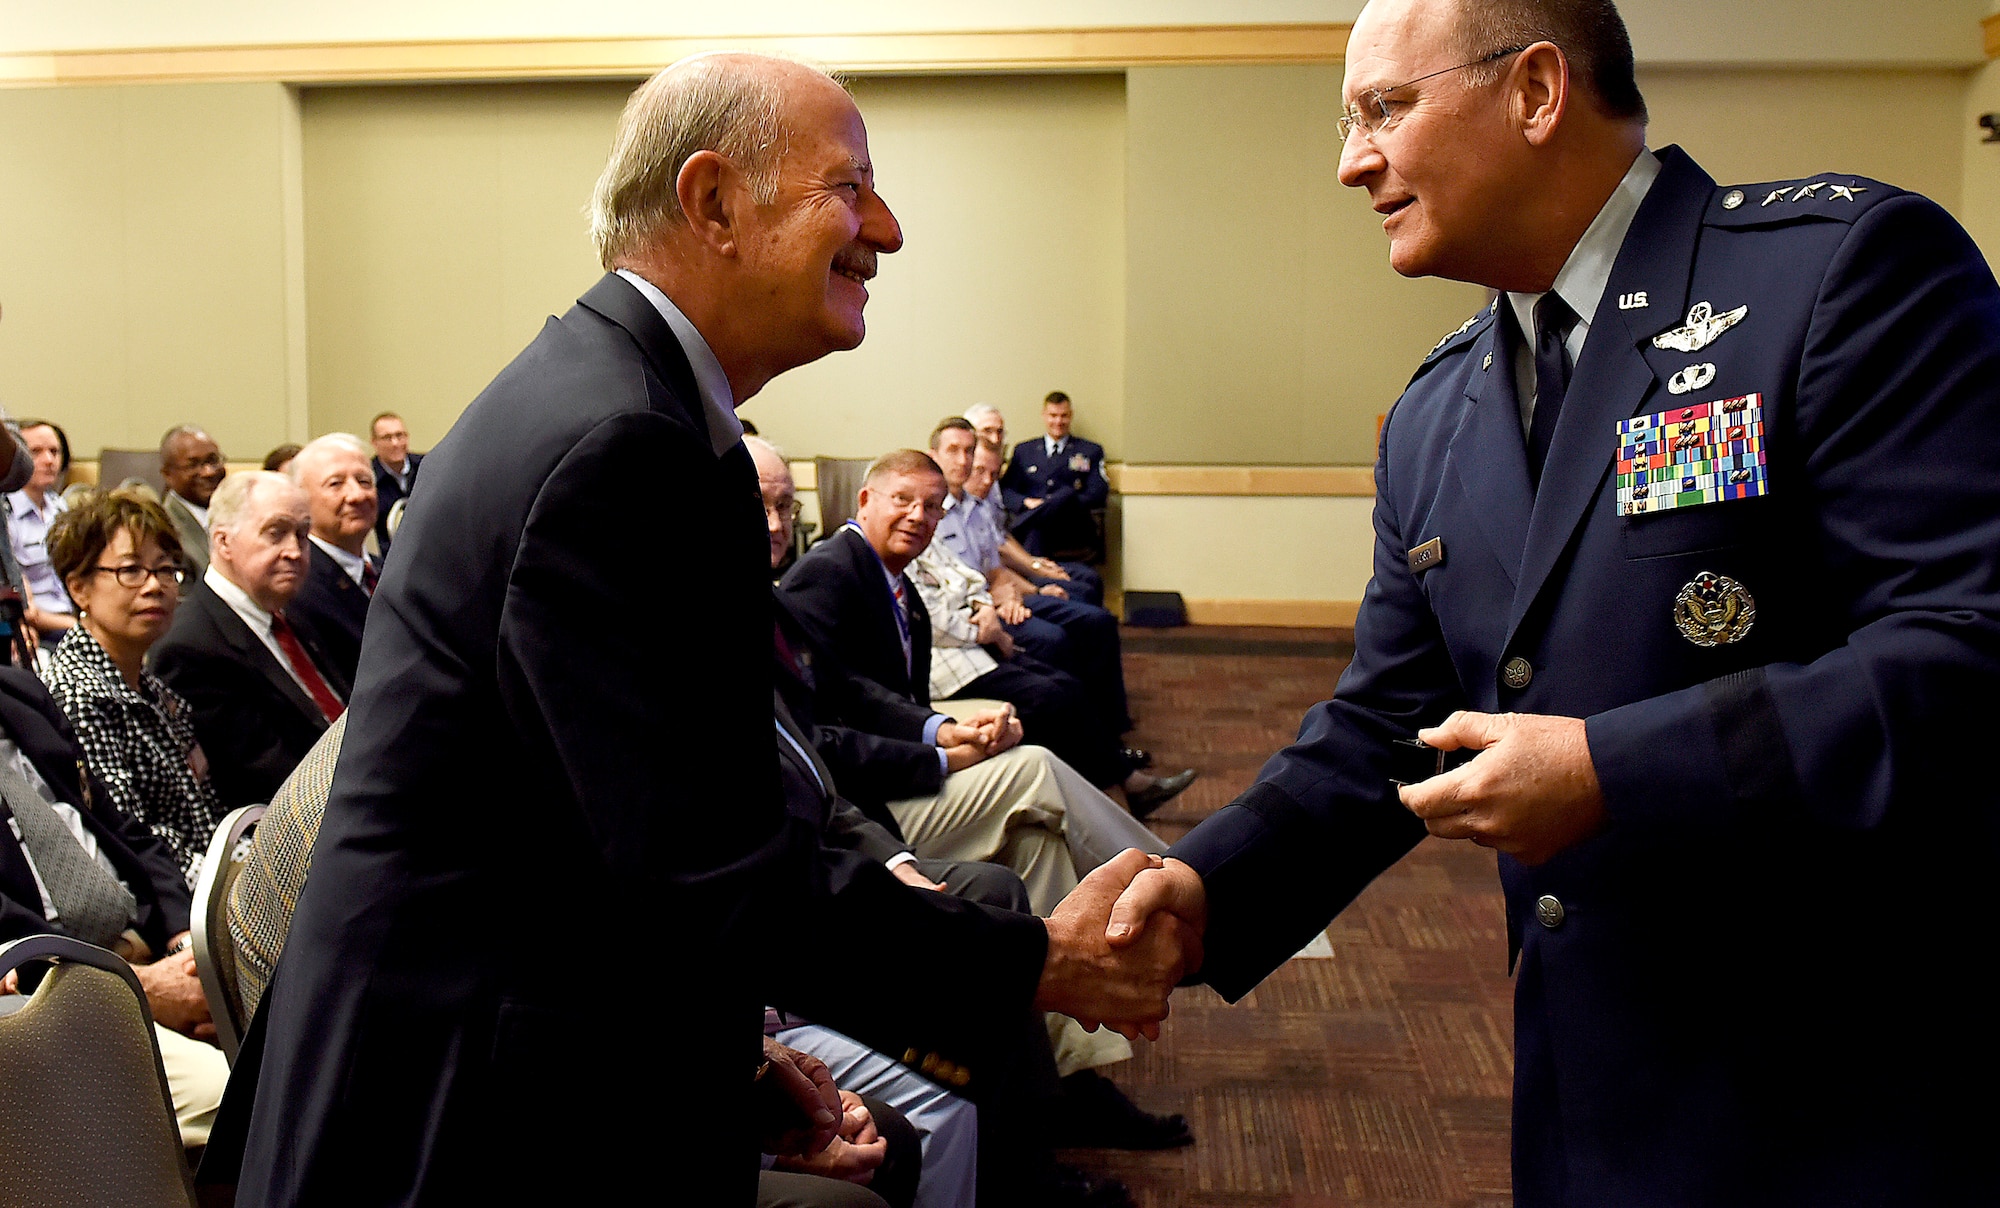 Lt. Gen. James Jackson (right), chief of Air Force Reserve, presents a Vietnam War veteran with a pin during a ceremony at the Pentagon, Washington, D.C., June 21, 2016. More than 10 veterans were recognized during the ceremony. (U.S. Air Force photo by Staff Sgt. Alyssa C. Gibson/Release)